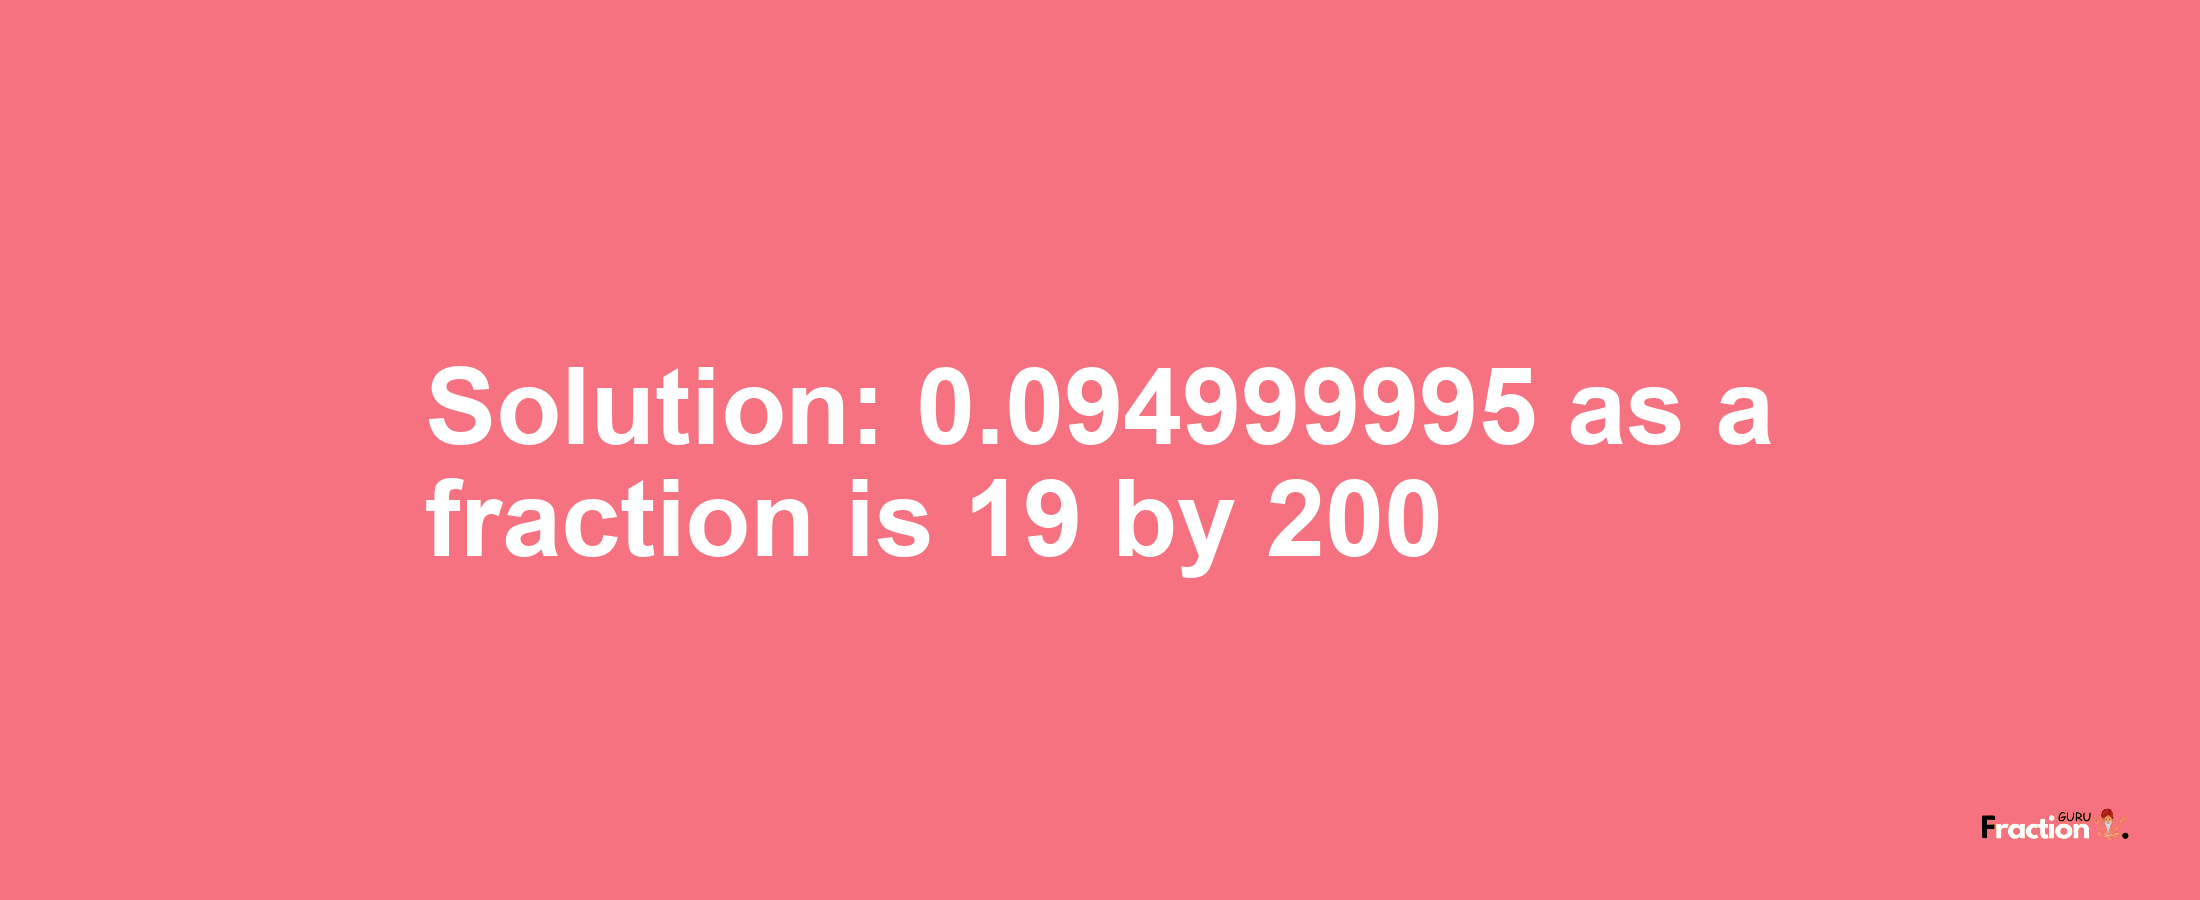 Solution:0.094999995 as a fraction is 19/200